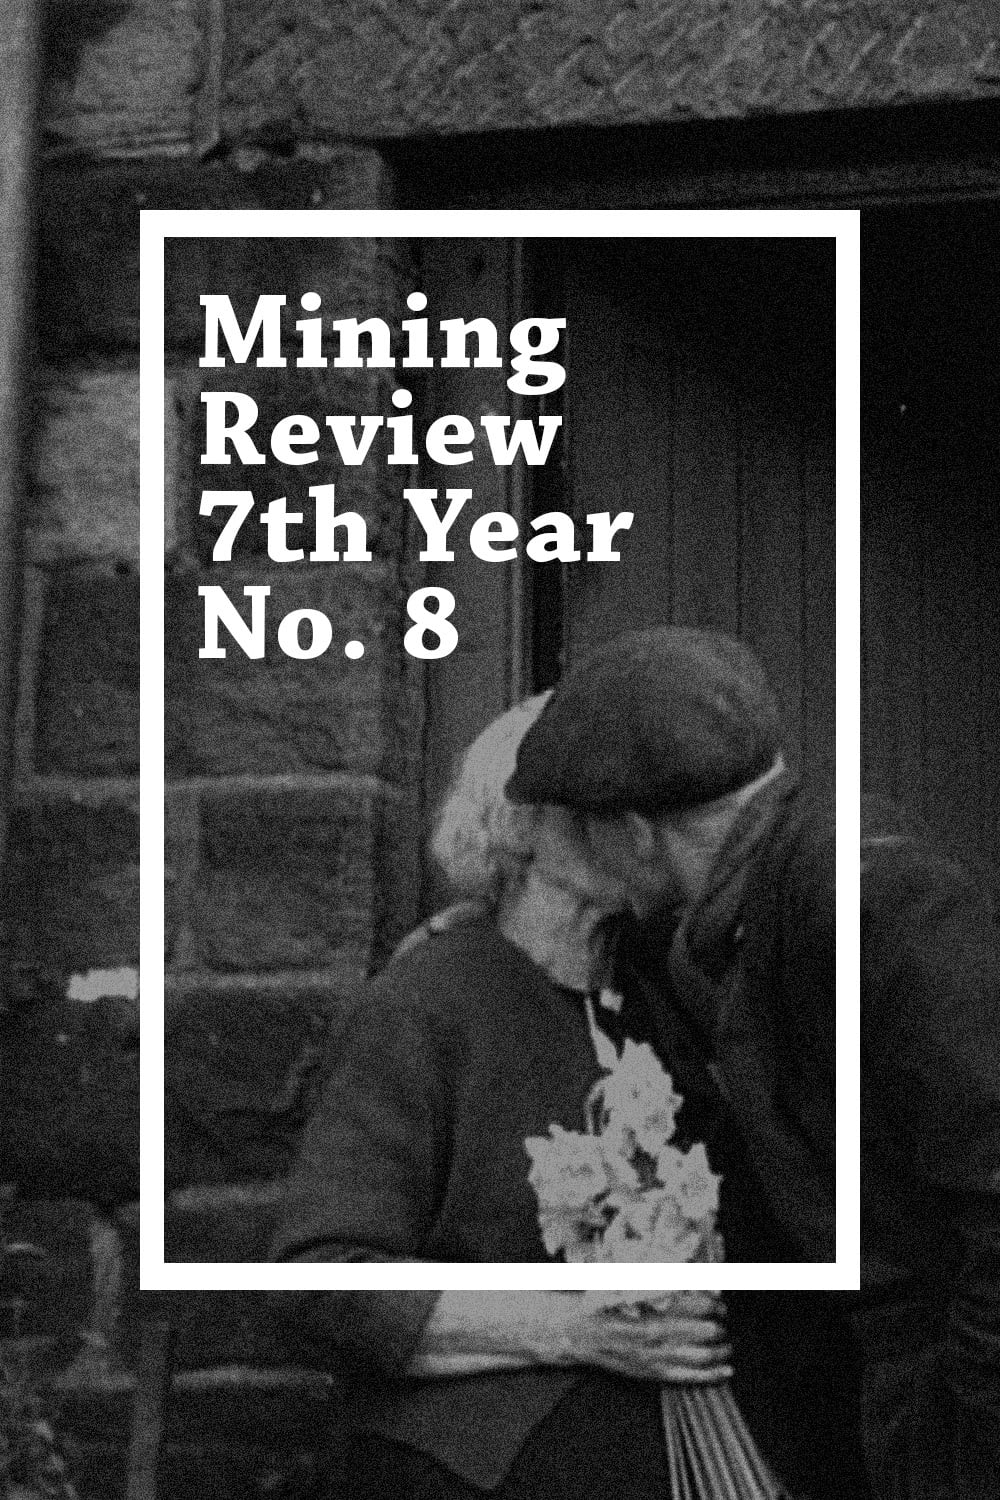 Mining Review 7th Year No. 8